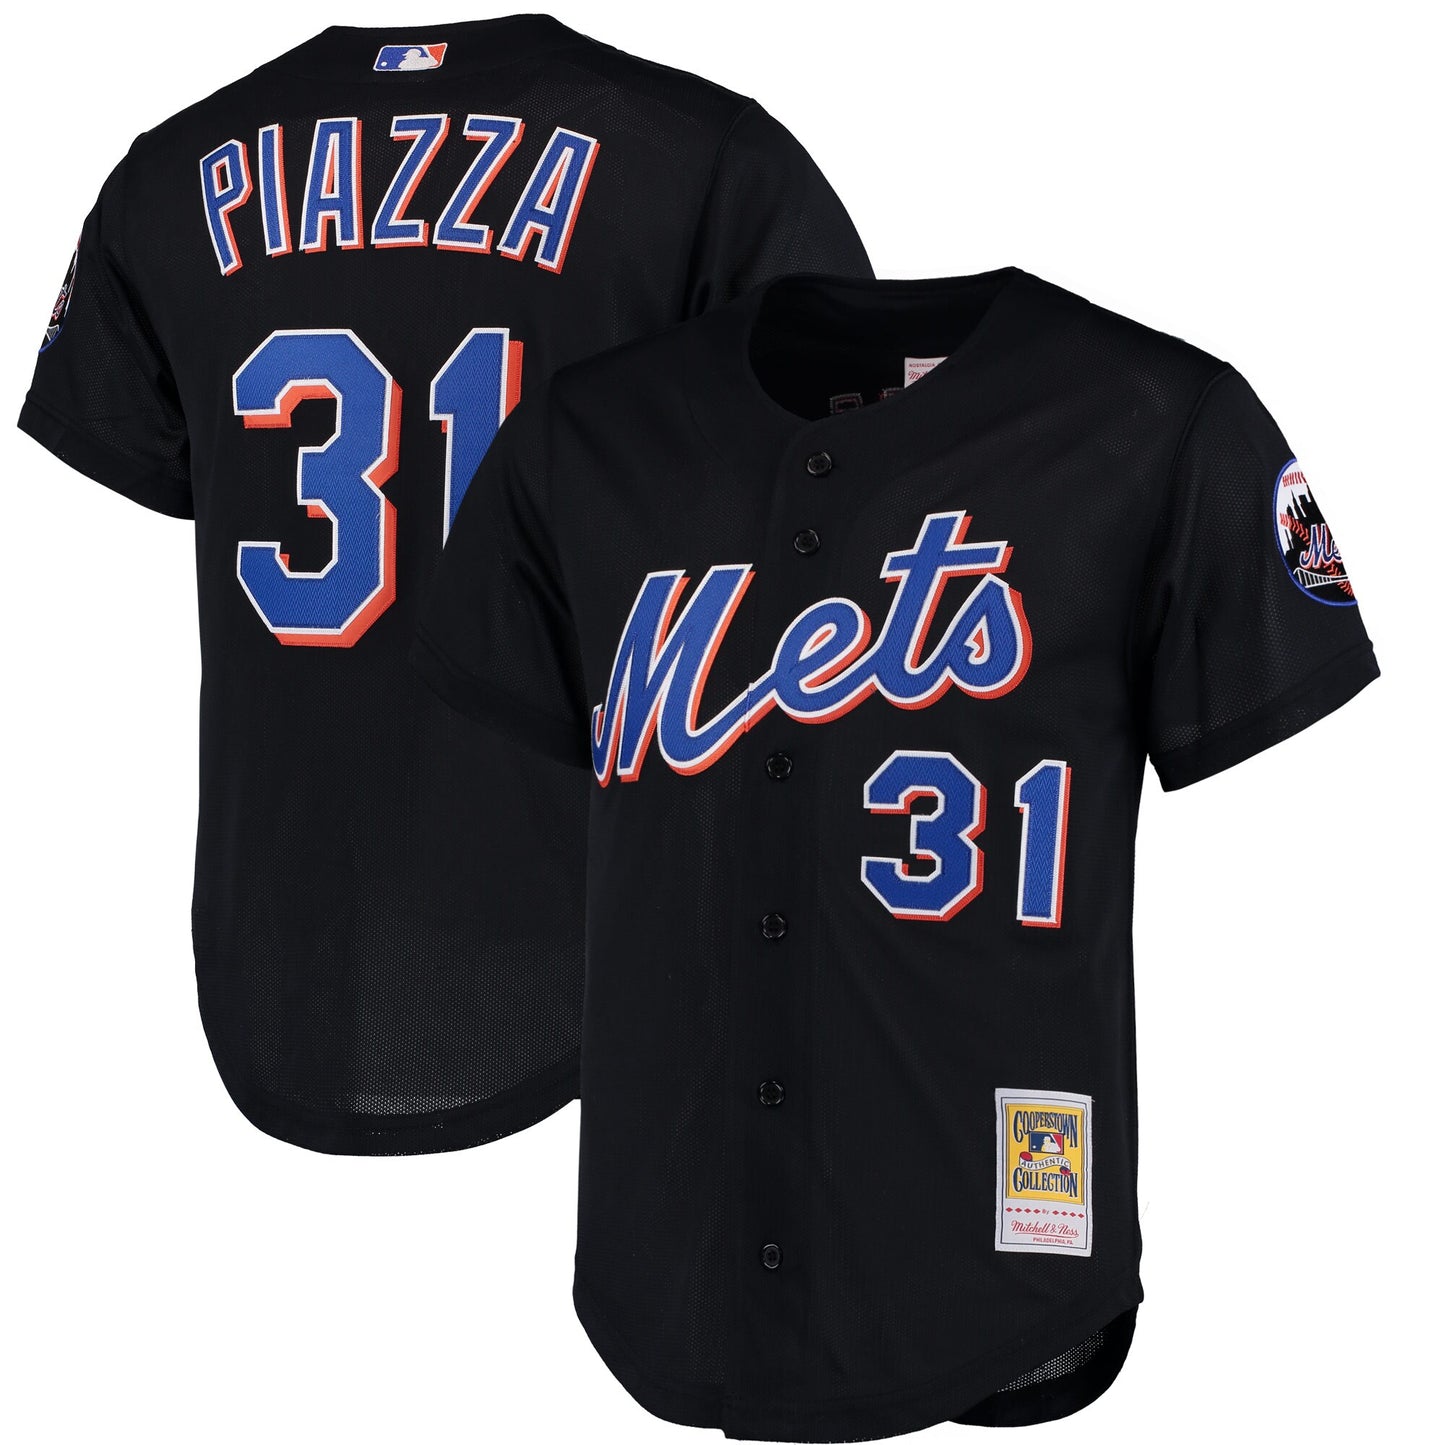 Mike Piazza New York Mets Mitchell & Ness Cooperstown Collection Mesh Batting Practice Button-Up Jersey - Black